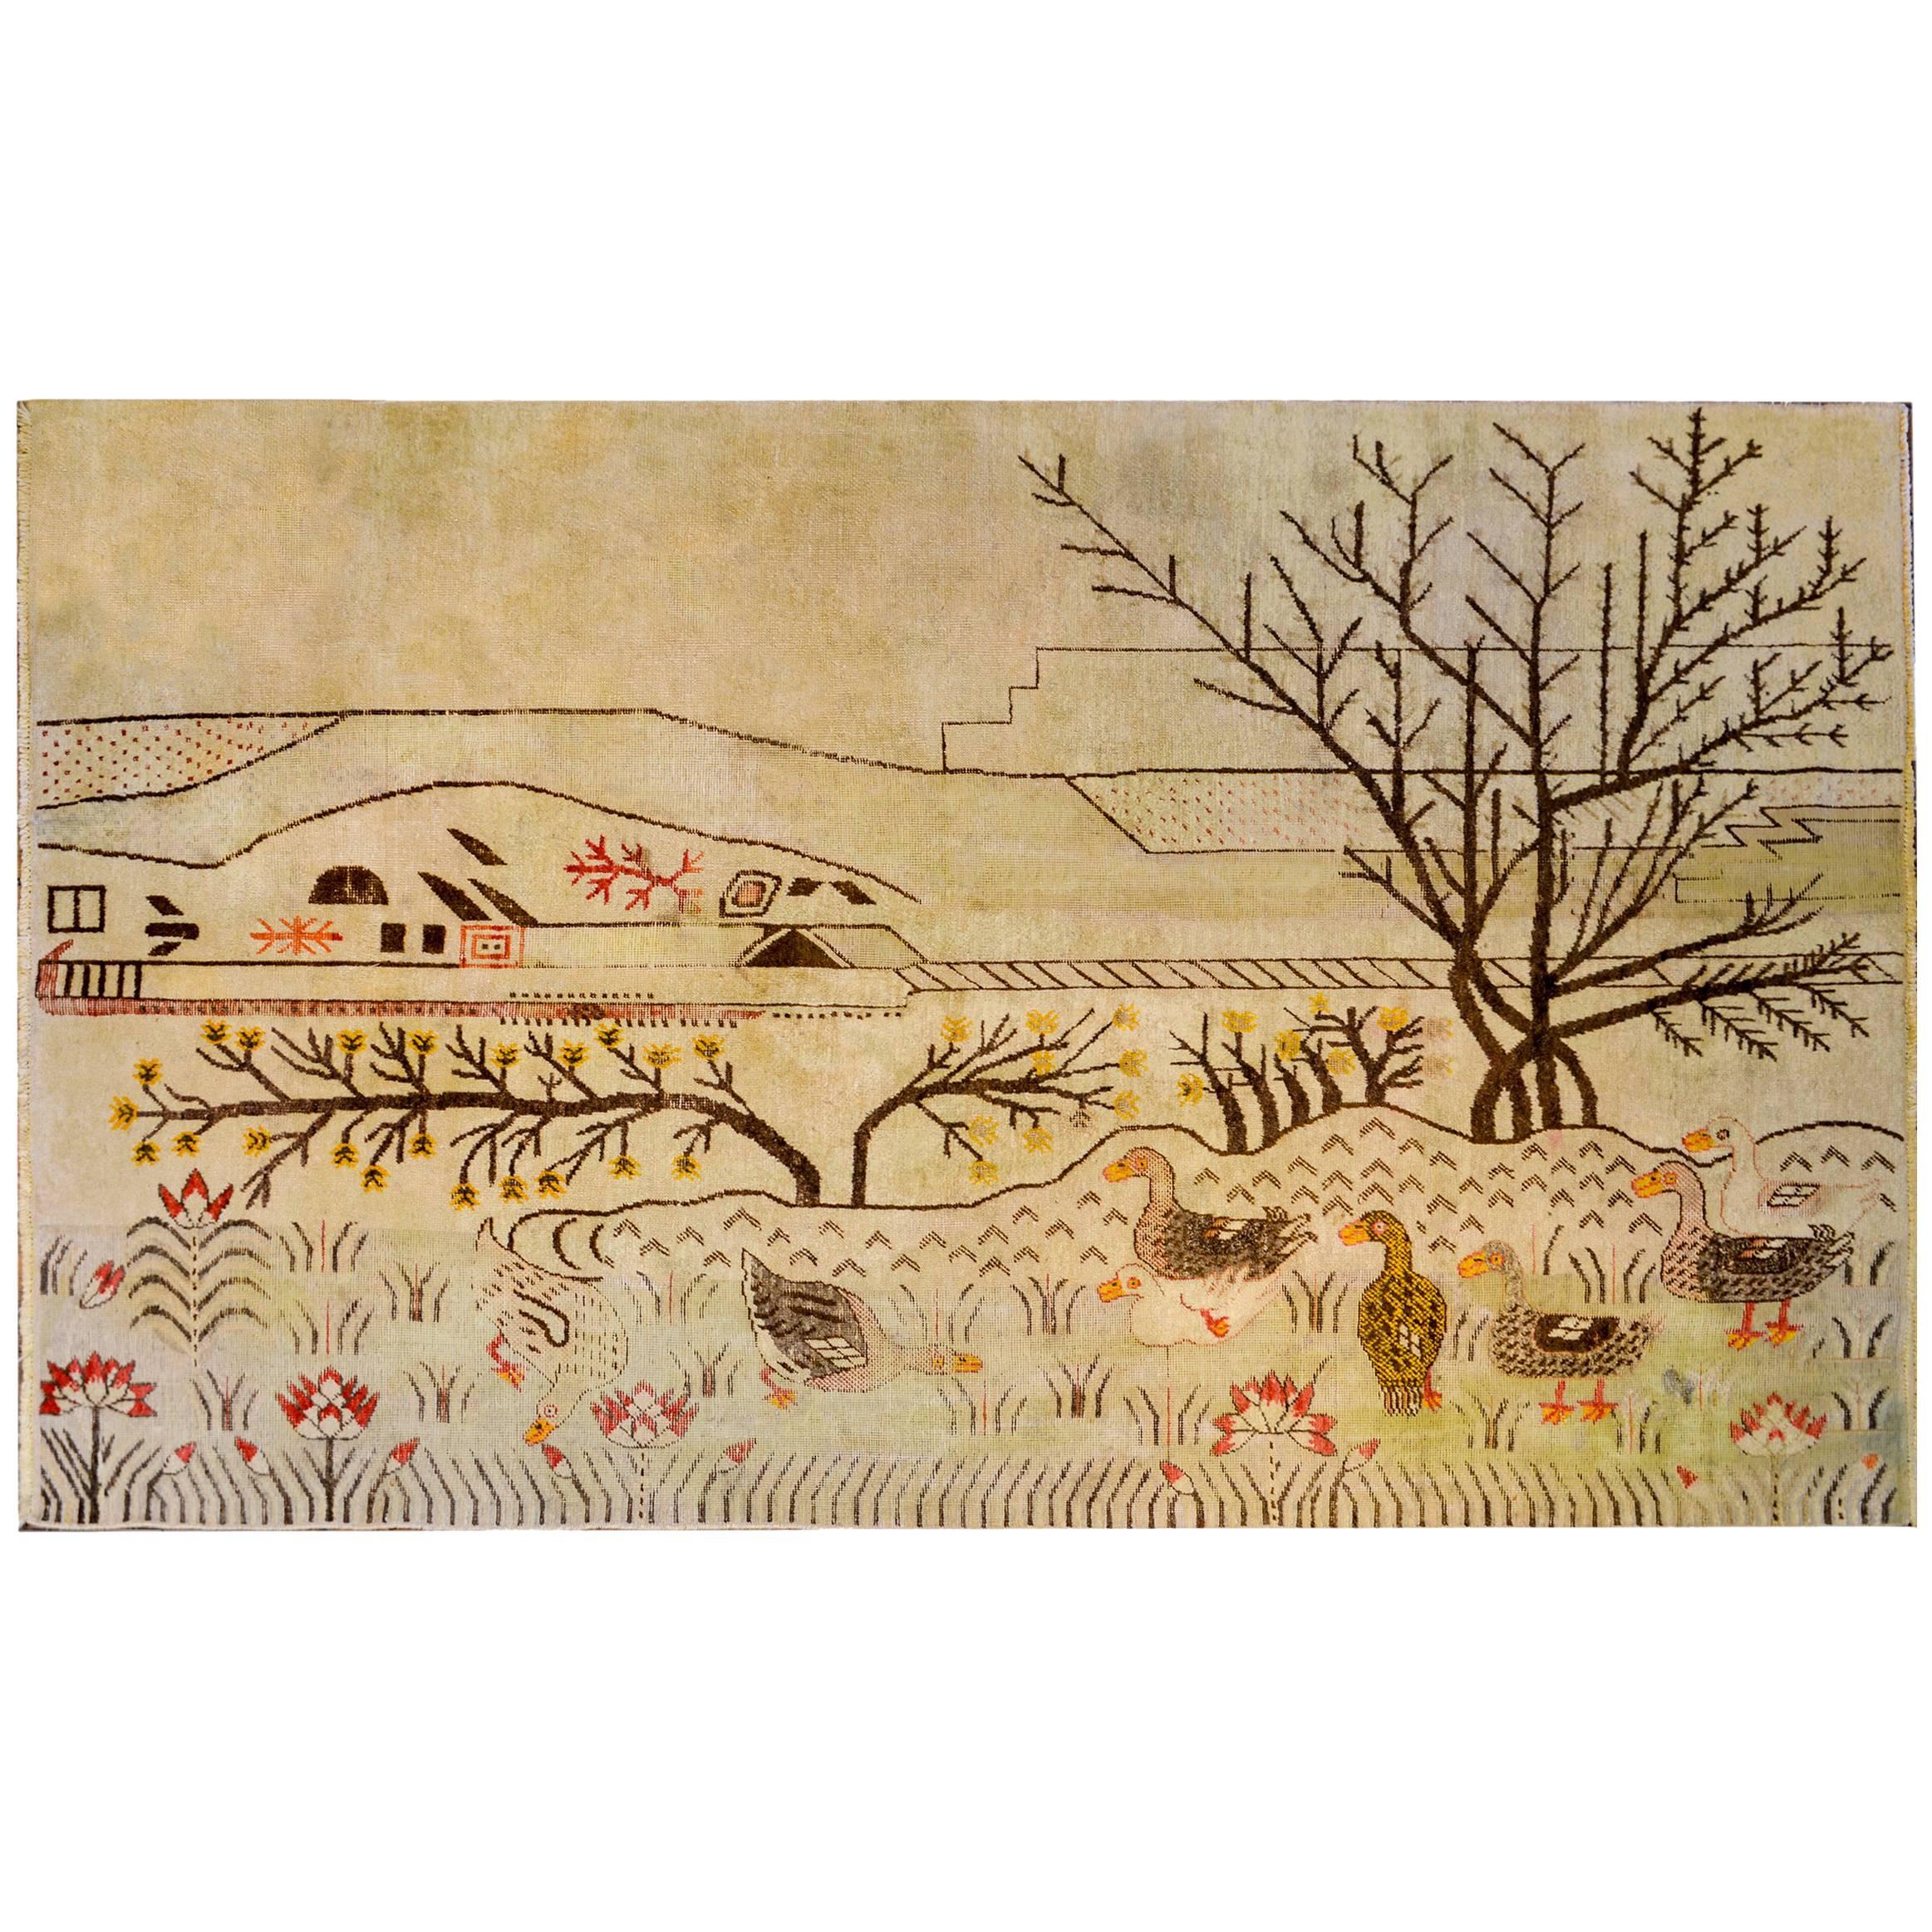 Whimsical Bucolic Pictorial Samaghand Rug